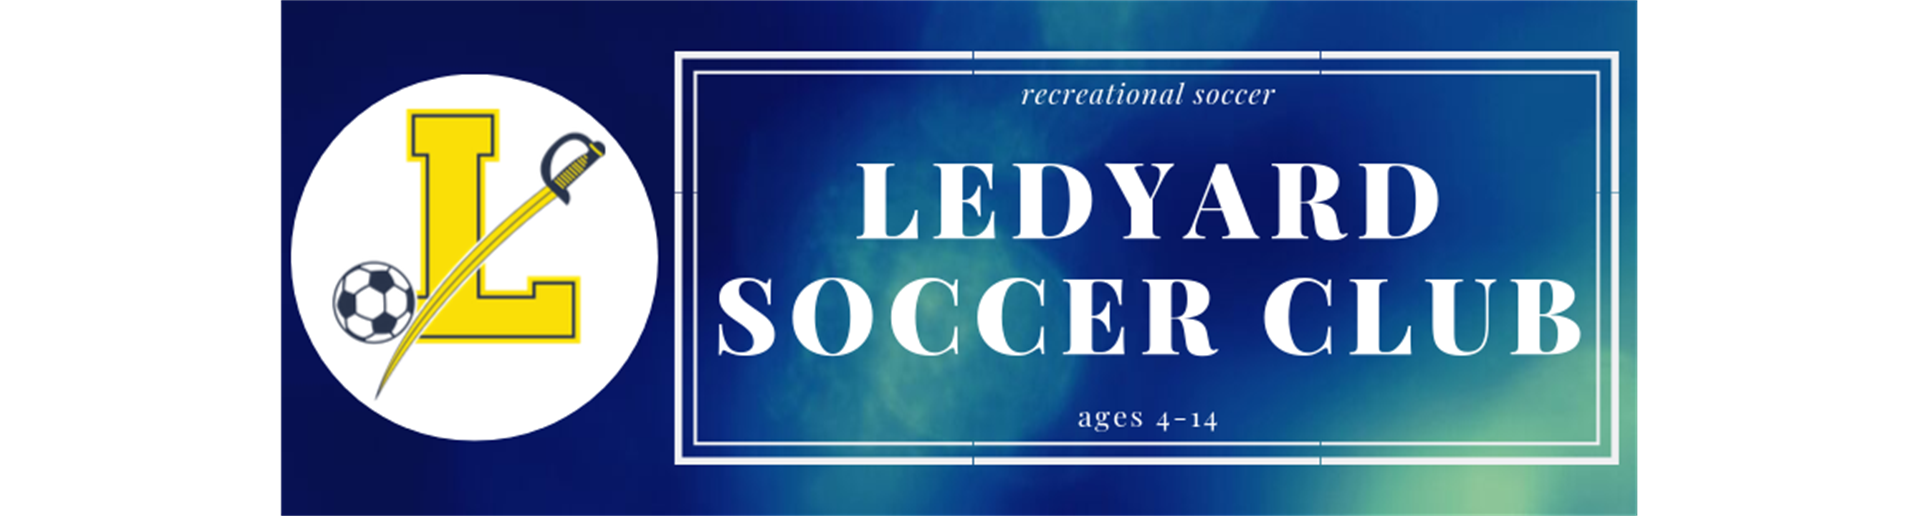 Welcome to Ledyard Soccer Club